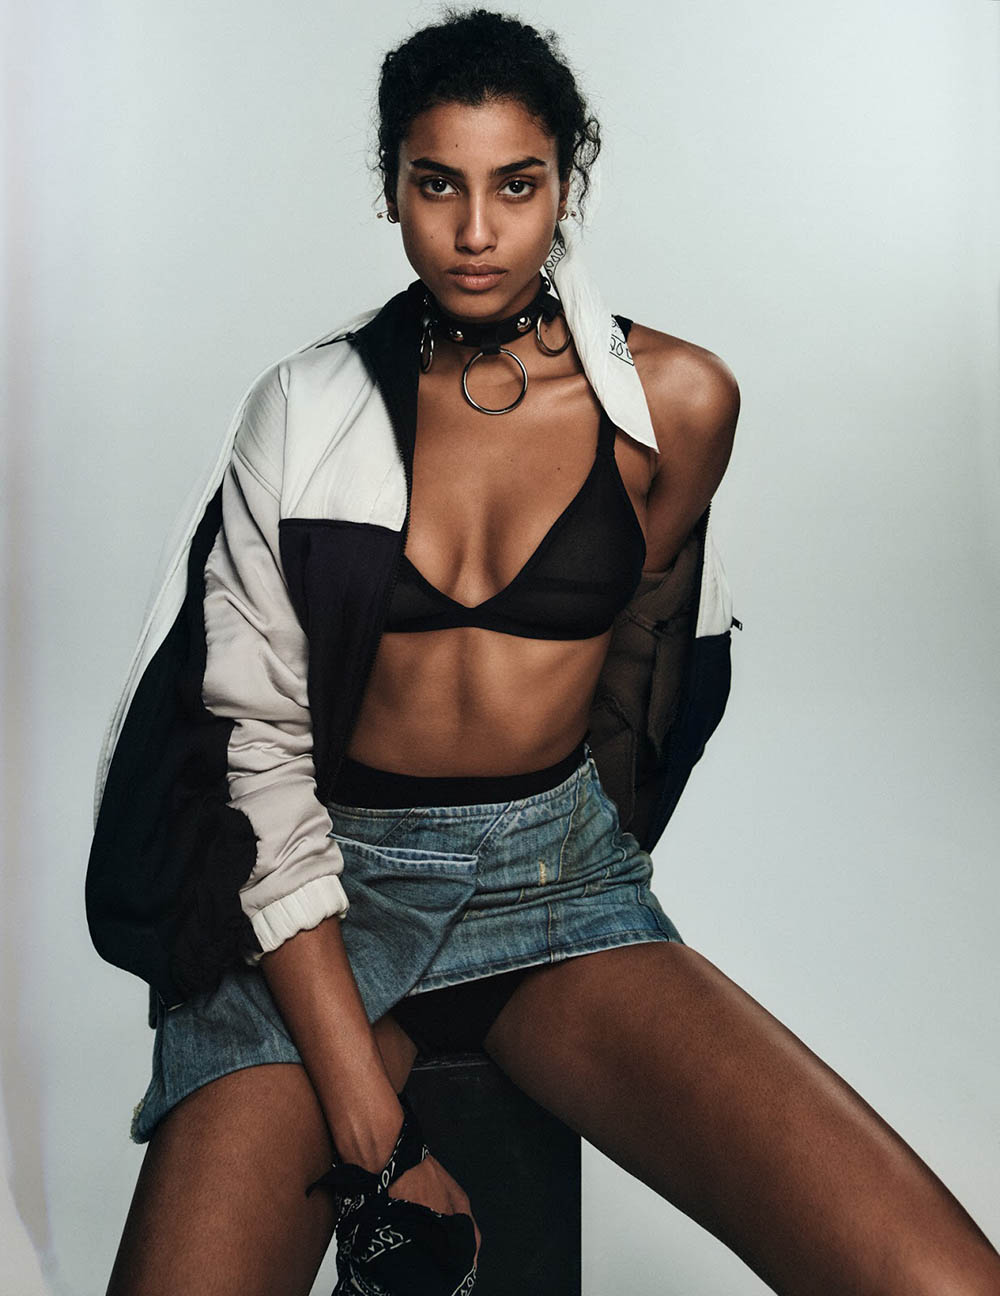 Imaan Hammam covers Vogue Russia June 2019 by Chris Colls